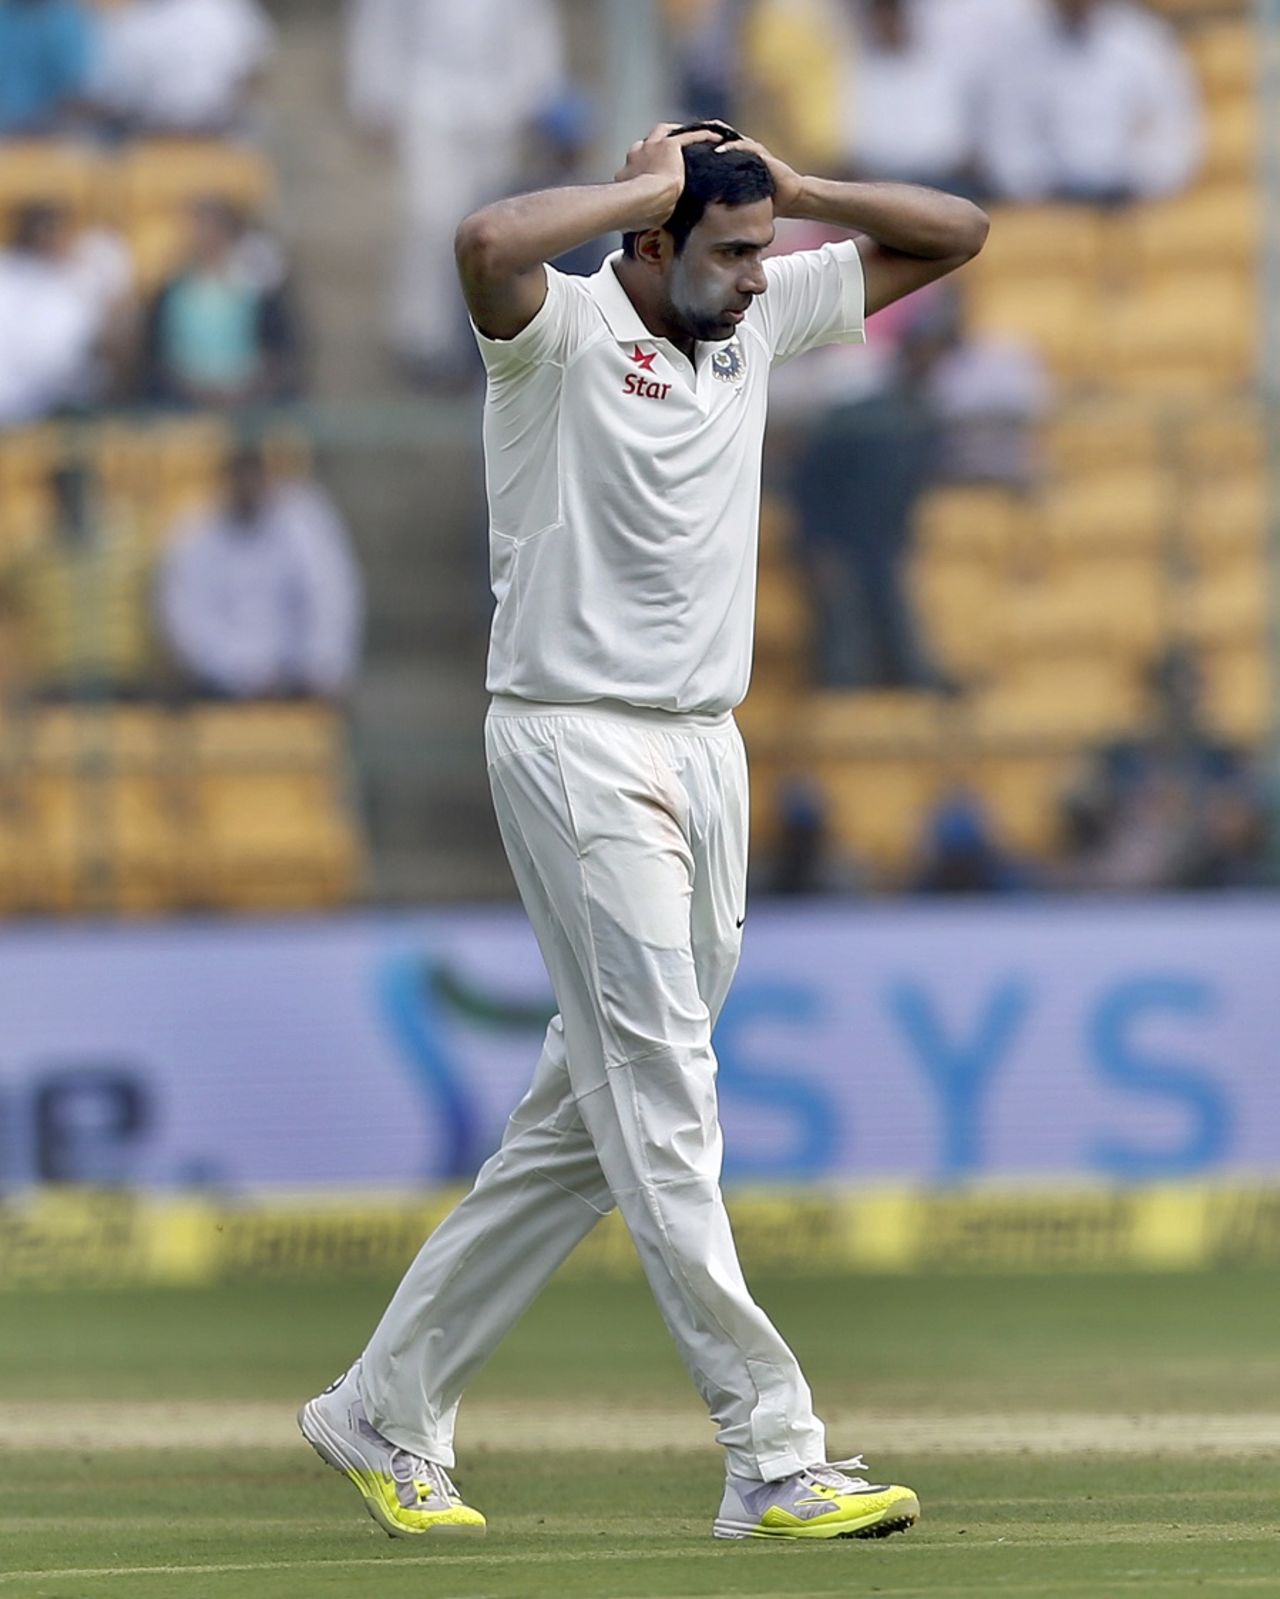 R Ashwin ponders the vagaries of life and cricket, India v Australia, 2nd Test, Bengaluru, 2nd day, March 5, 2017